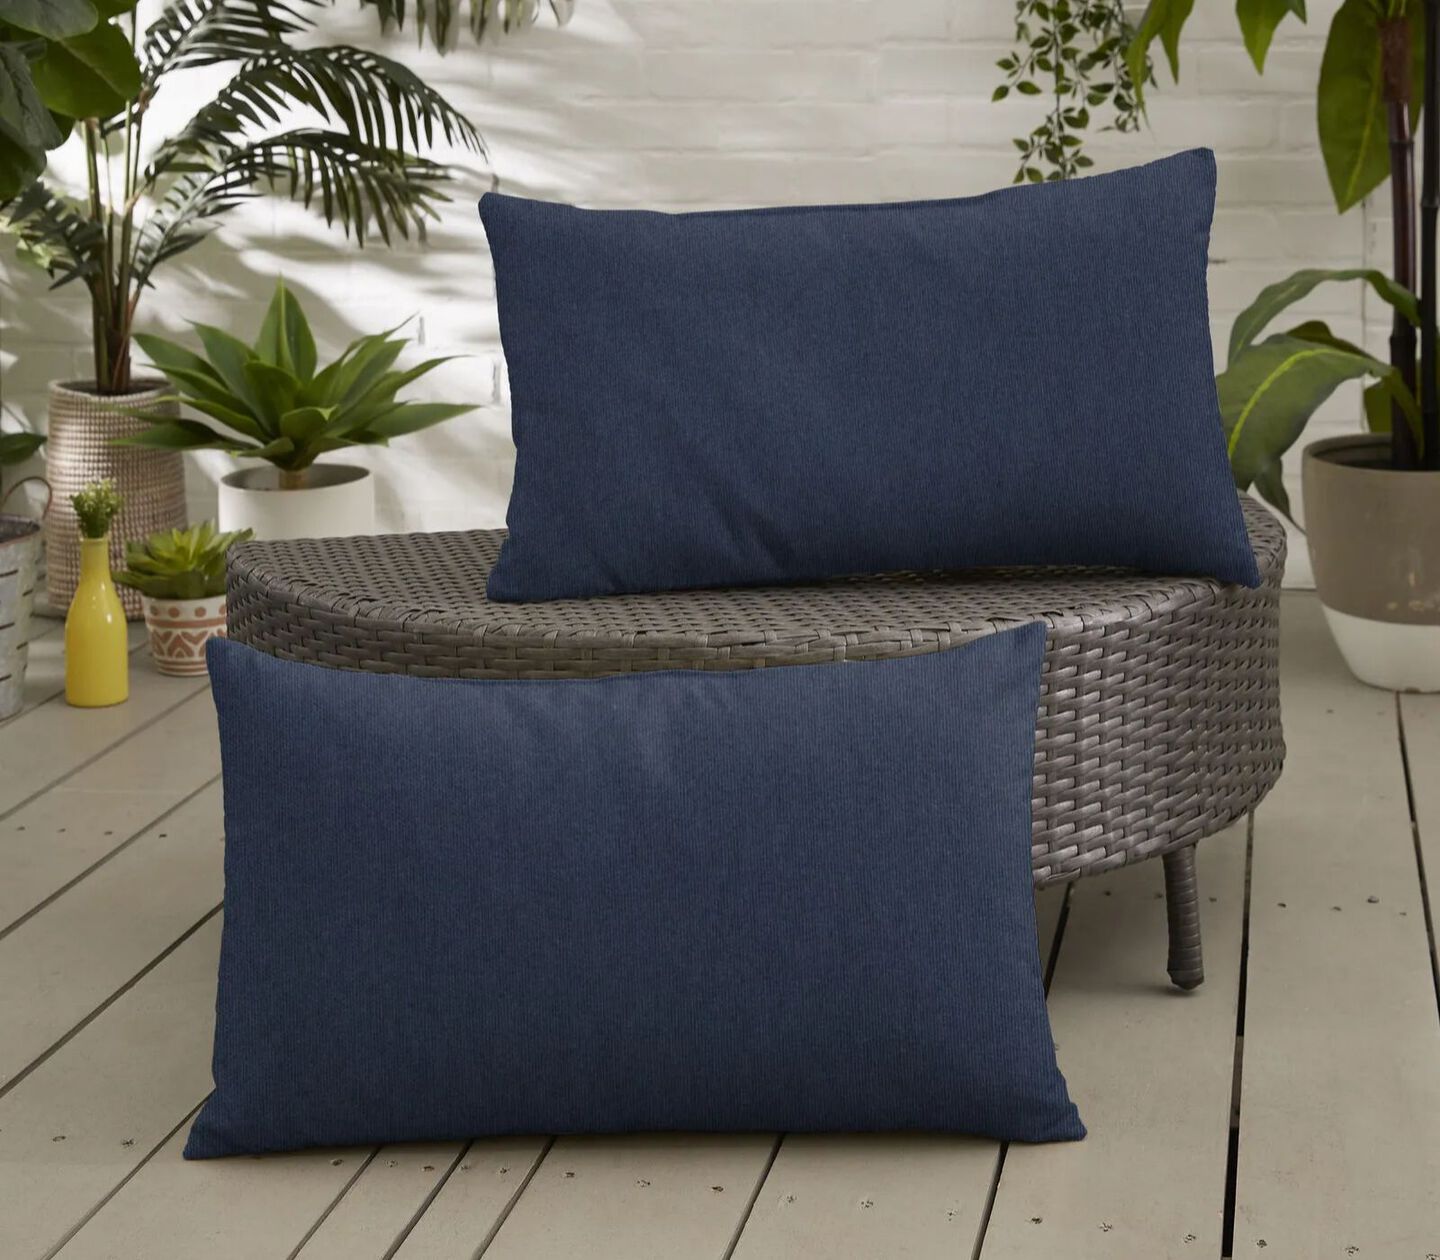 Two navy pillows placed upright on a patio and ottoman